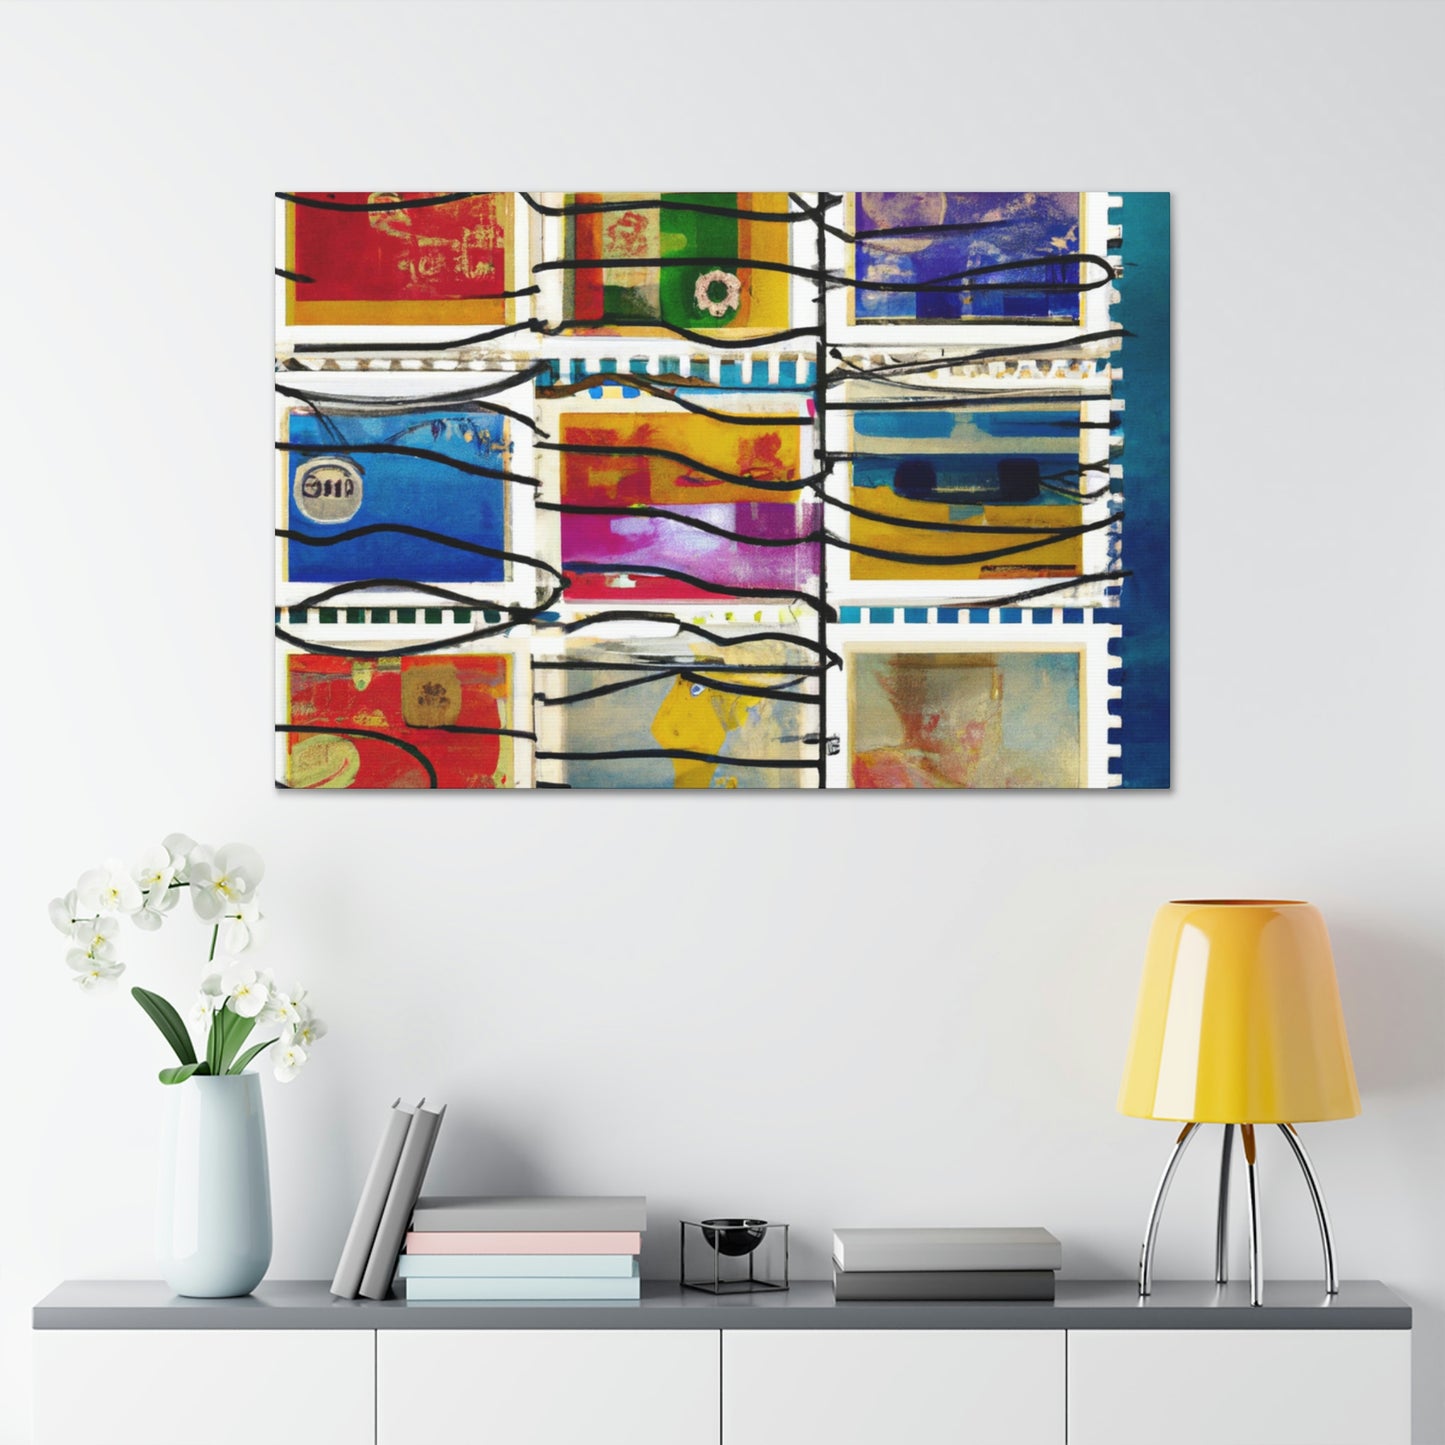 "Cultural Treasures of the World" Stamps - Postage Stamp Collector Canvas Wall Art